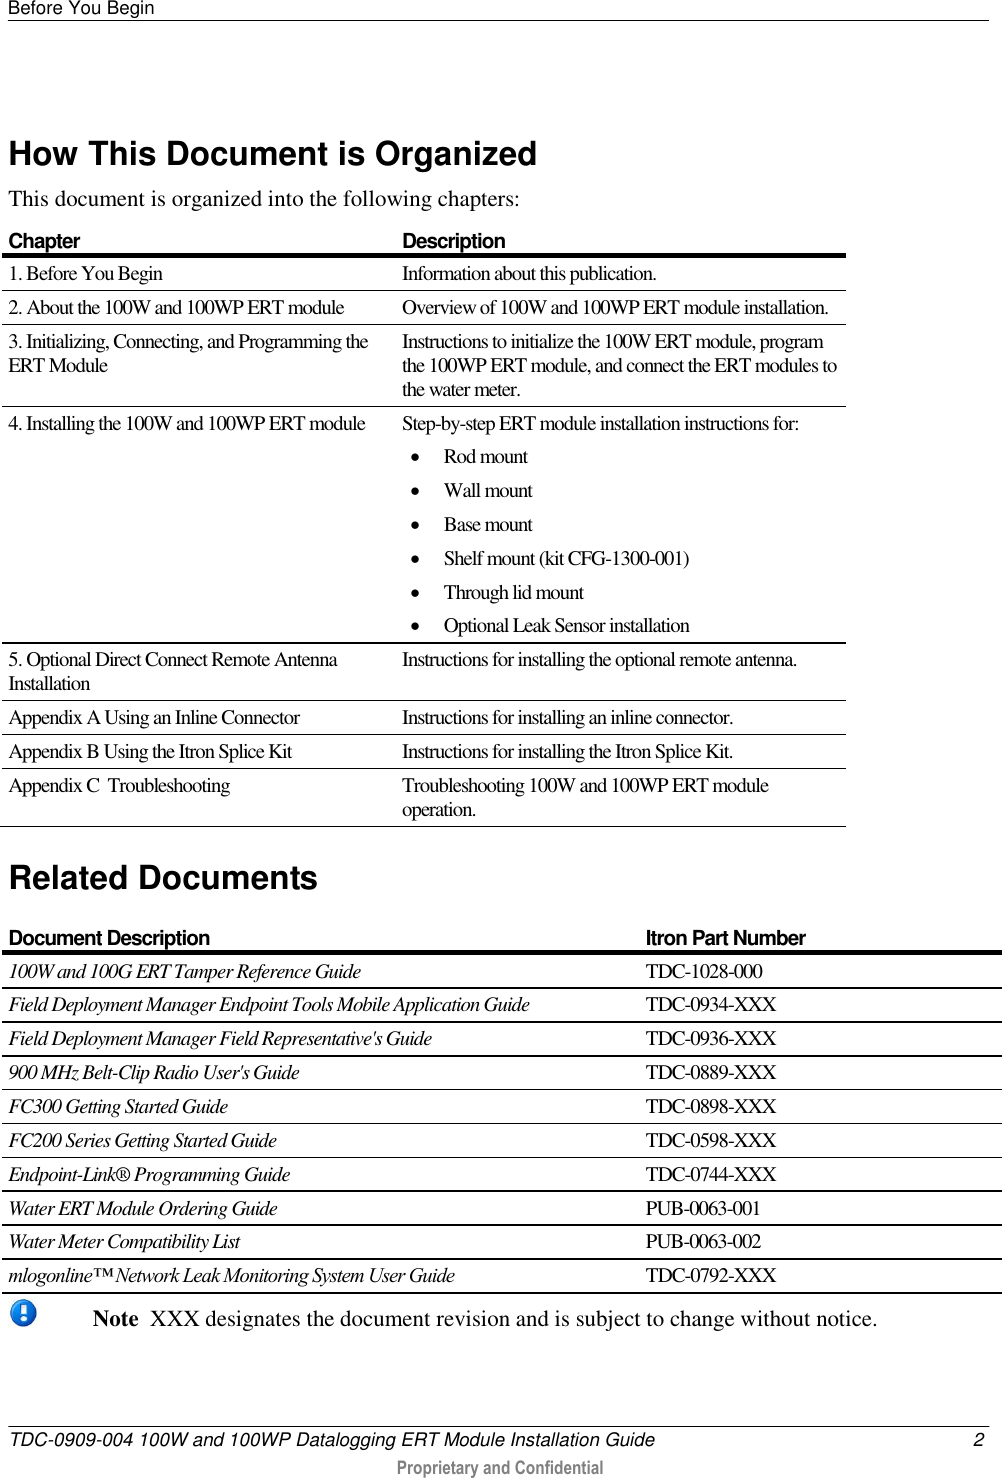 Before You Begin   TDC-0909-004 100W and 100WP Datalogging ERT Module Installation Guide  2  Proprietary and Confidential     How This Document is Organized This document is organized into the following chapters: Chapter Description 1. Before You Begin Information about this publication. 2. About the 100W and 100WP ERT module Overview of 100W and 100WP ERT module installation.  3. Initializing, Connecting, and Programming the ERT Module Instructions to initialize the 100W ERT module, program the 100WP ERT module, and connect the ERT modules to the water meter. 4. Installing the 100W and 100WP ERT module Step-by-step ERT module installation instructions for:  Rod mount  Wall mount  Base mount  Shelf mount (kit CFG-1300-001)  Through lid mount  Optional Leak Sensor installation 5. Optional Direct Connect Remote Antenna Installation Instructions for installing the optional remote antenna. Appendix A Using an Inline Connector Instructions for installing an inline connector. Appendix B Using the Itron Splice Kit Instructions for installing the Itron Splice Kit. Appendix C  Troubleshooting Troubleshooting 100W and 100WP ERT module operation.  Related Documents Document Description Itron Part Number  100W and 100G ERT Tamper Reference Guide TDC-1028-000 Field Deployment Manager Endpoint Tools Mobile Application Guide TDC-0934-XXX Field Deployment Manager Field Representative&apos;s Guide  TDC-0936-XXX 900 MHz Belt-Clip Radio User&apos;s Guide TDC-0889-XXX FC300 Getting Started Guide  TDC-0898-XXX FC200 Series Getting Started Guide TDC-0598-XXX Endpoint-Link® Programming Guide TDC-0744-XXX Water ERT Module Ordering Guide PUB-0063-001 Water Meter Compatibility List PUB-0063-002 mlogonline™ Network Leak Monitoring System User Guide TDC-0792-XXX  Note  XXX designates the document revision and is subject to change without notice.  